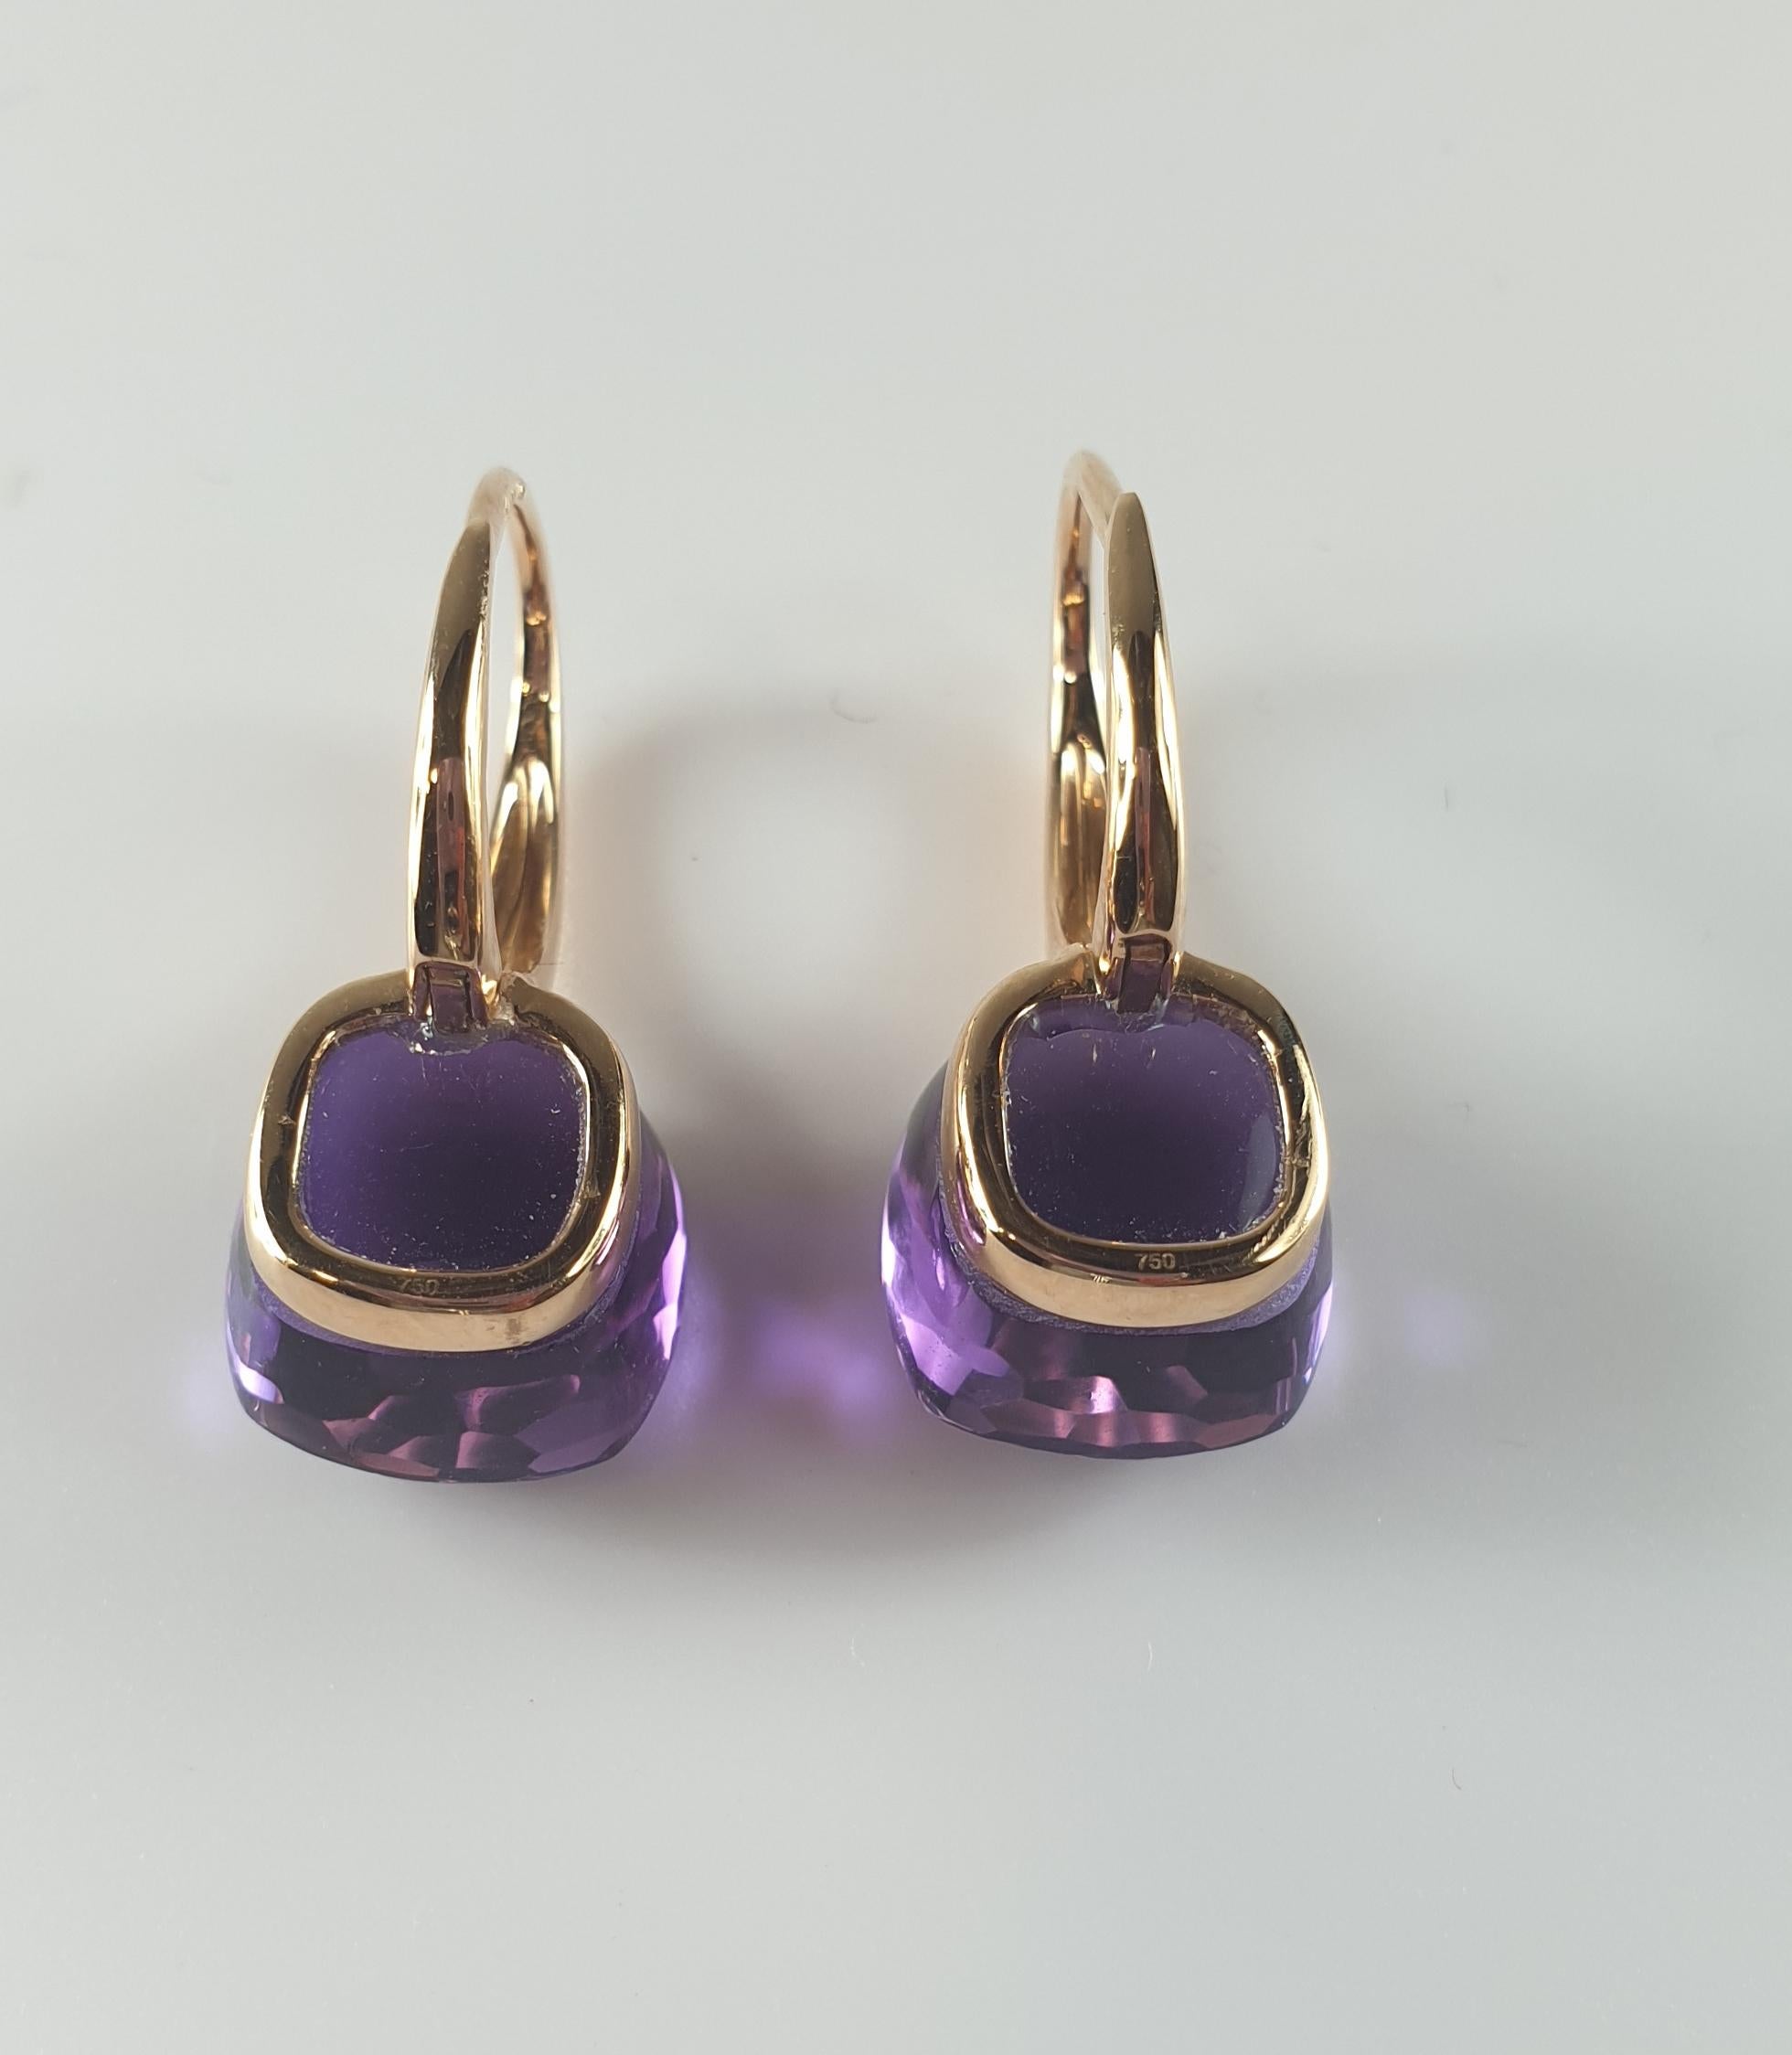 This pair of earrings weight total 5.9gr and measure 22mm or 0.75 inches
Amethyst are 4,00ct each 
Also available in rose quartz, pink quartz, green quartz, lemon quartz, milky quartz  topaze
Please note that carat weights may slightly vary as each